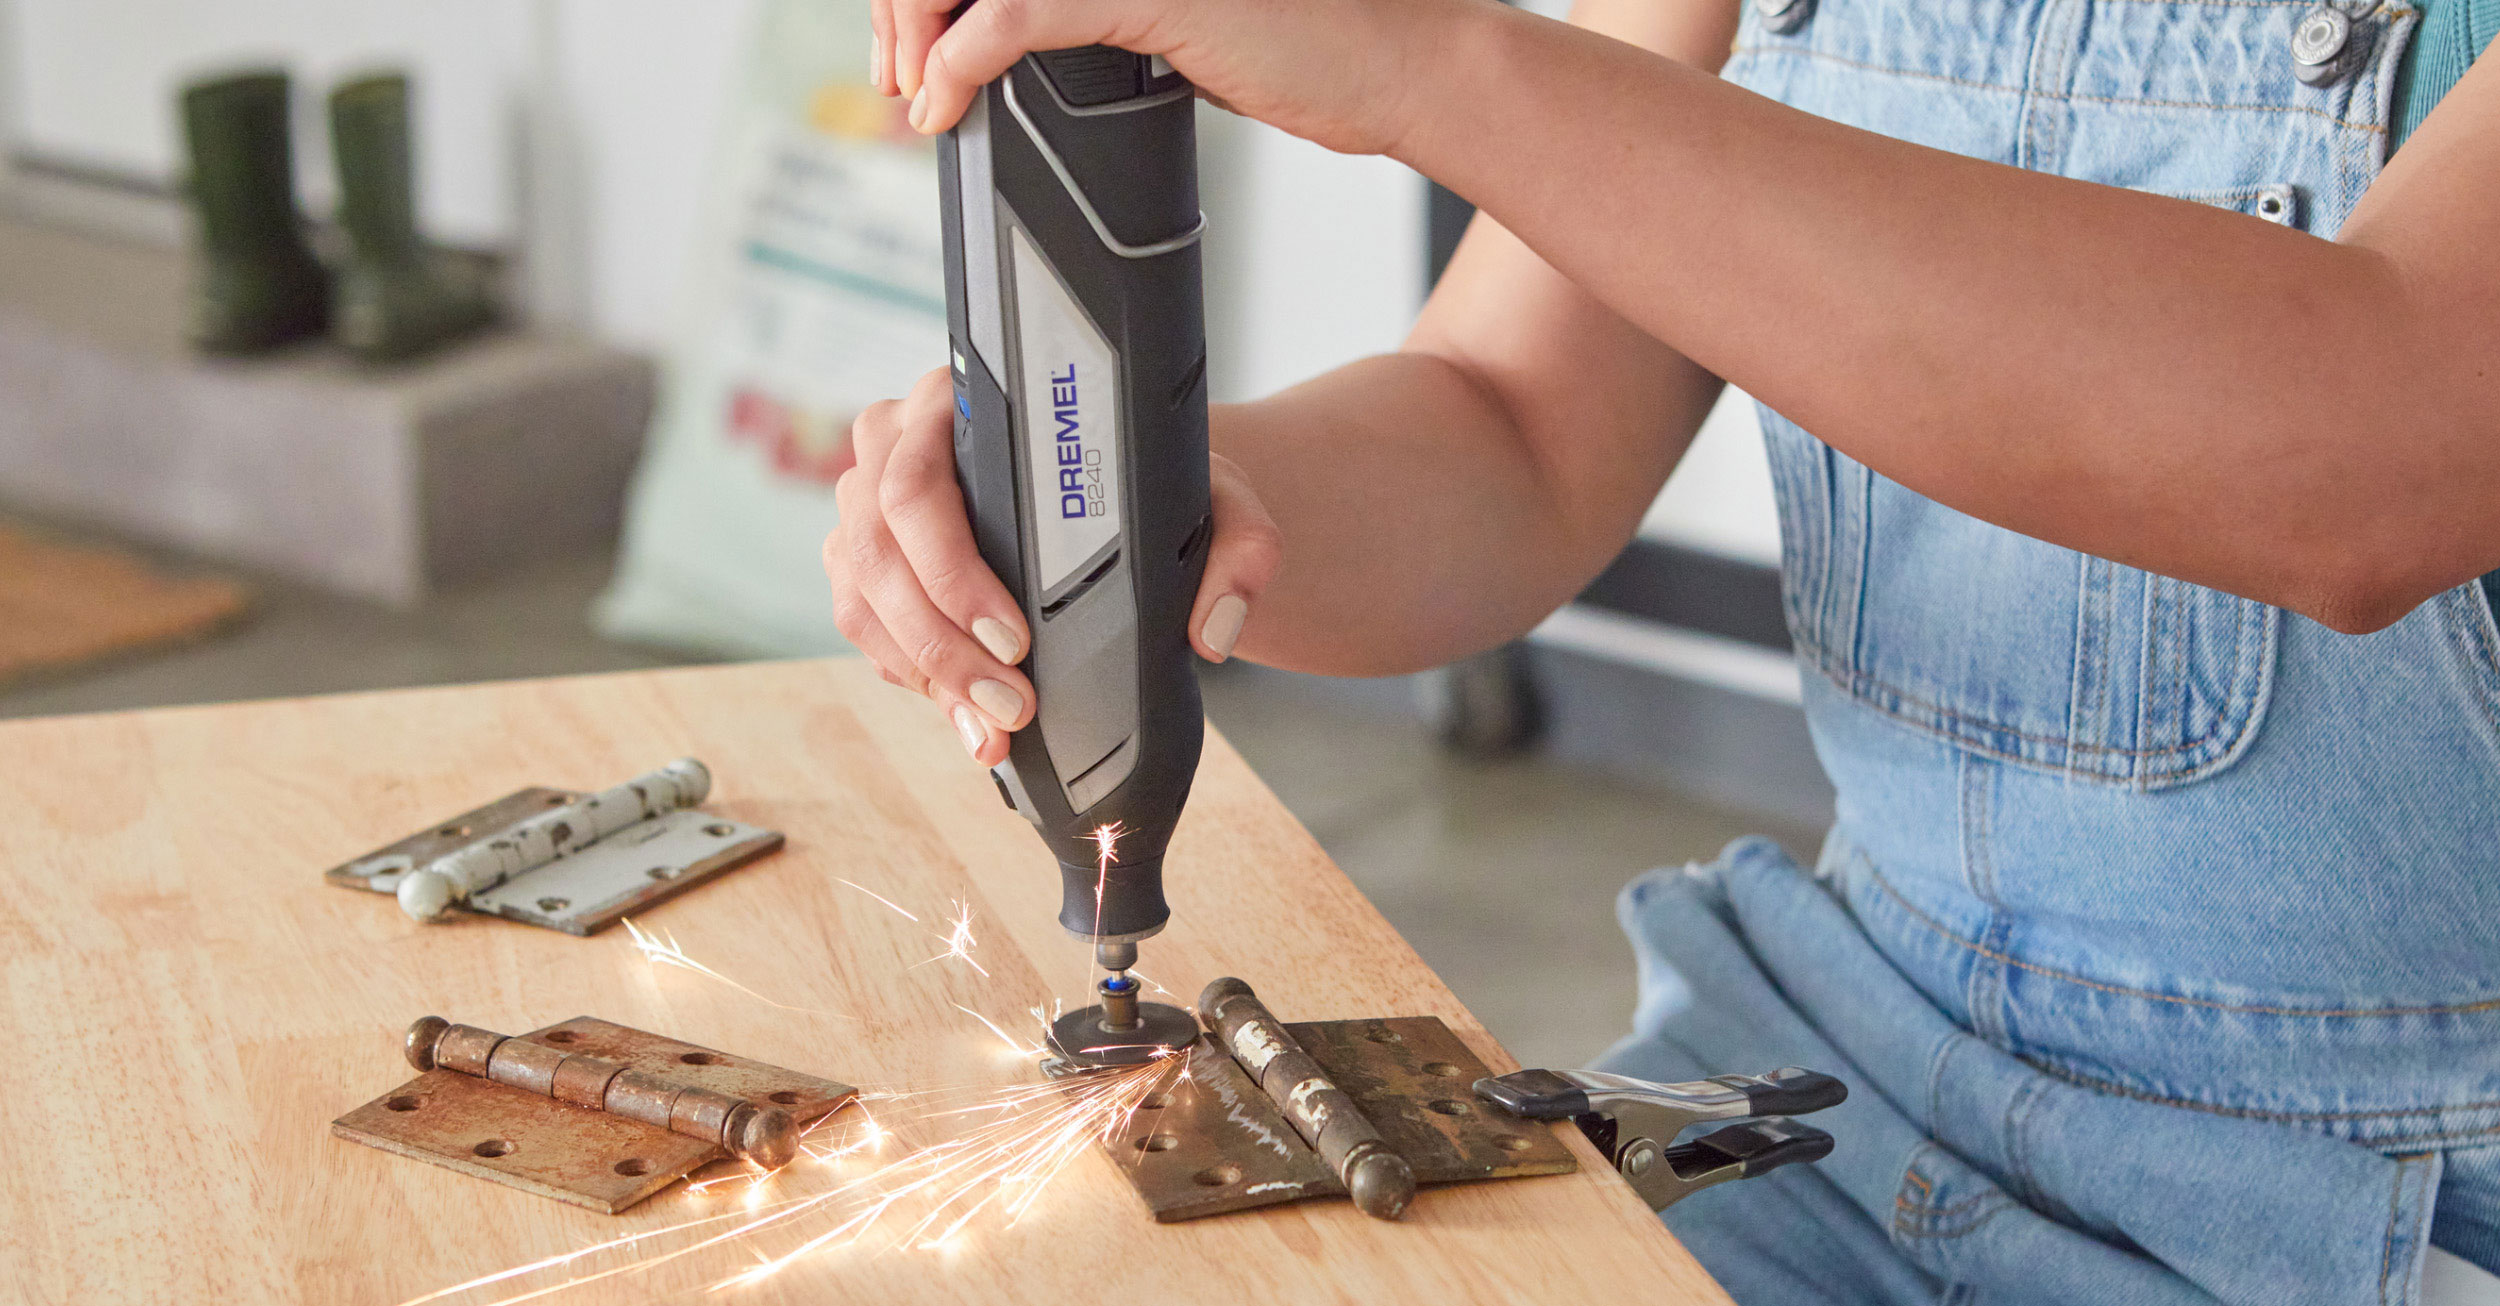 Grainger on X: The Dremel 8240 offers high-performance and